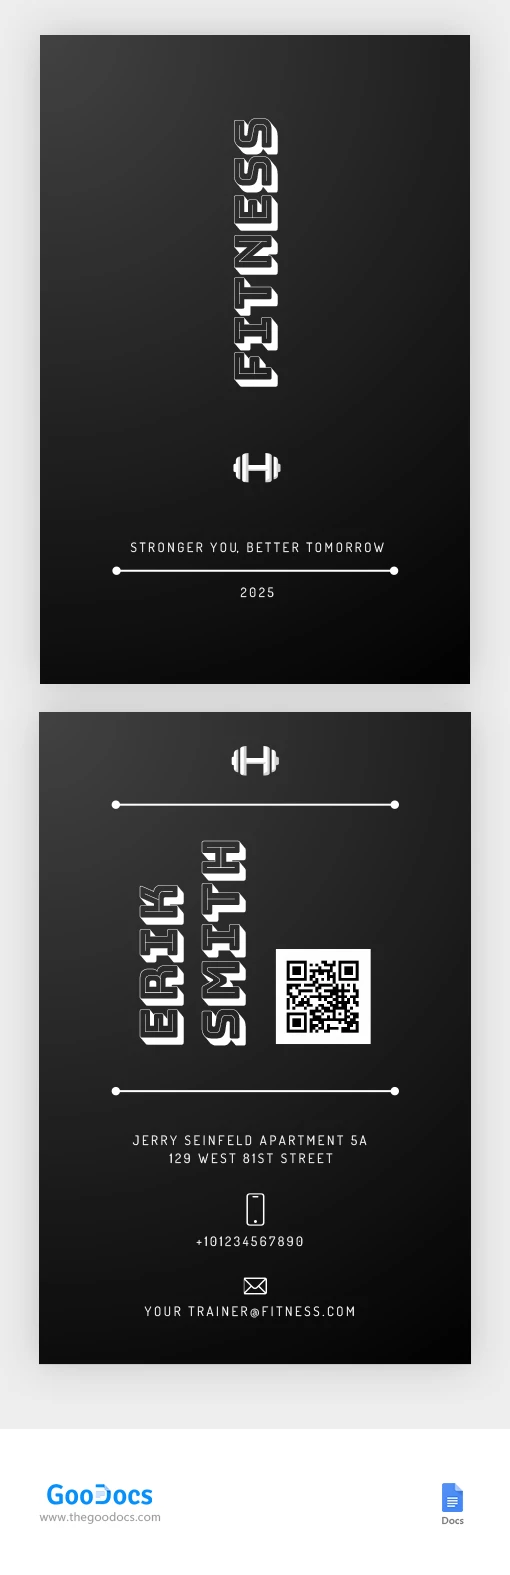 Fitness Business Cards - free Google Docs Template - 10067195